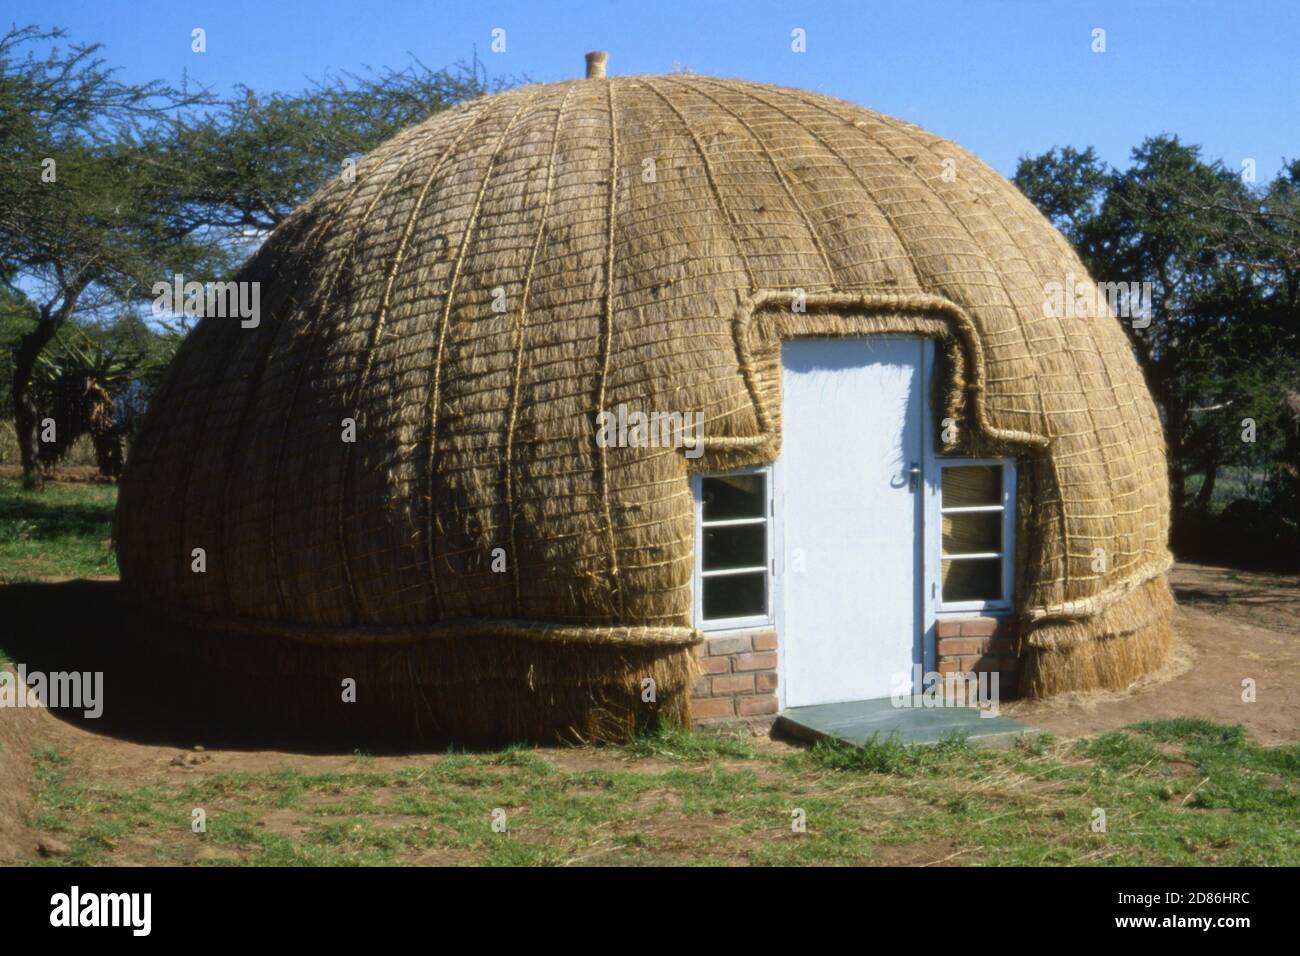 Traditional Kraal hut, but with modern door and windows for tourist accommodation, South Africa 1981 Stock Photo